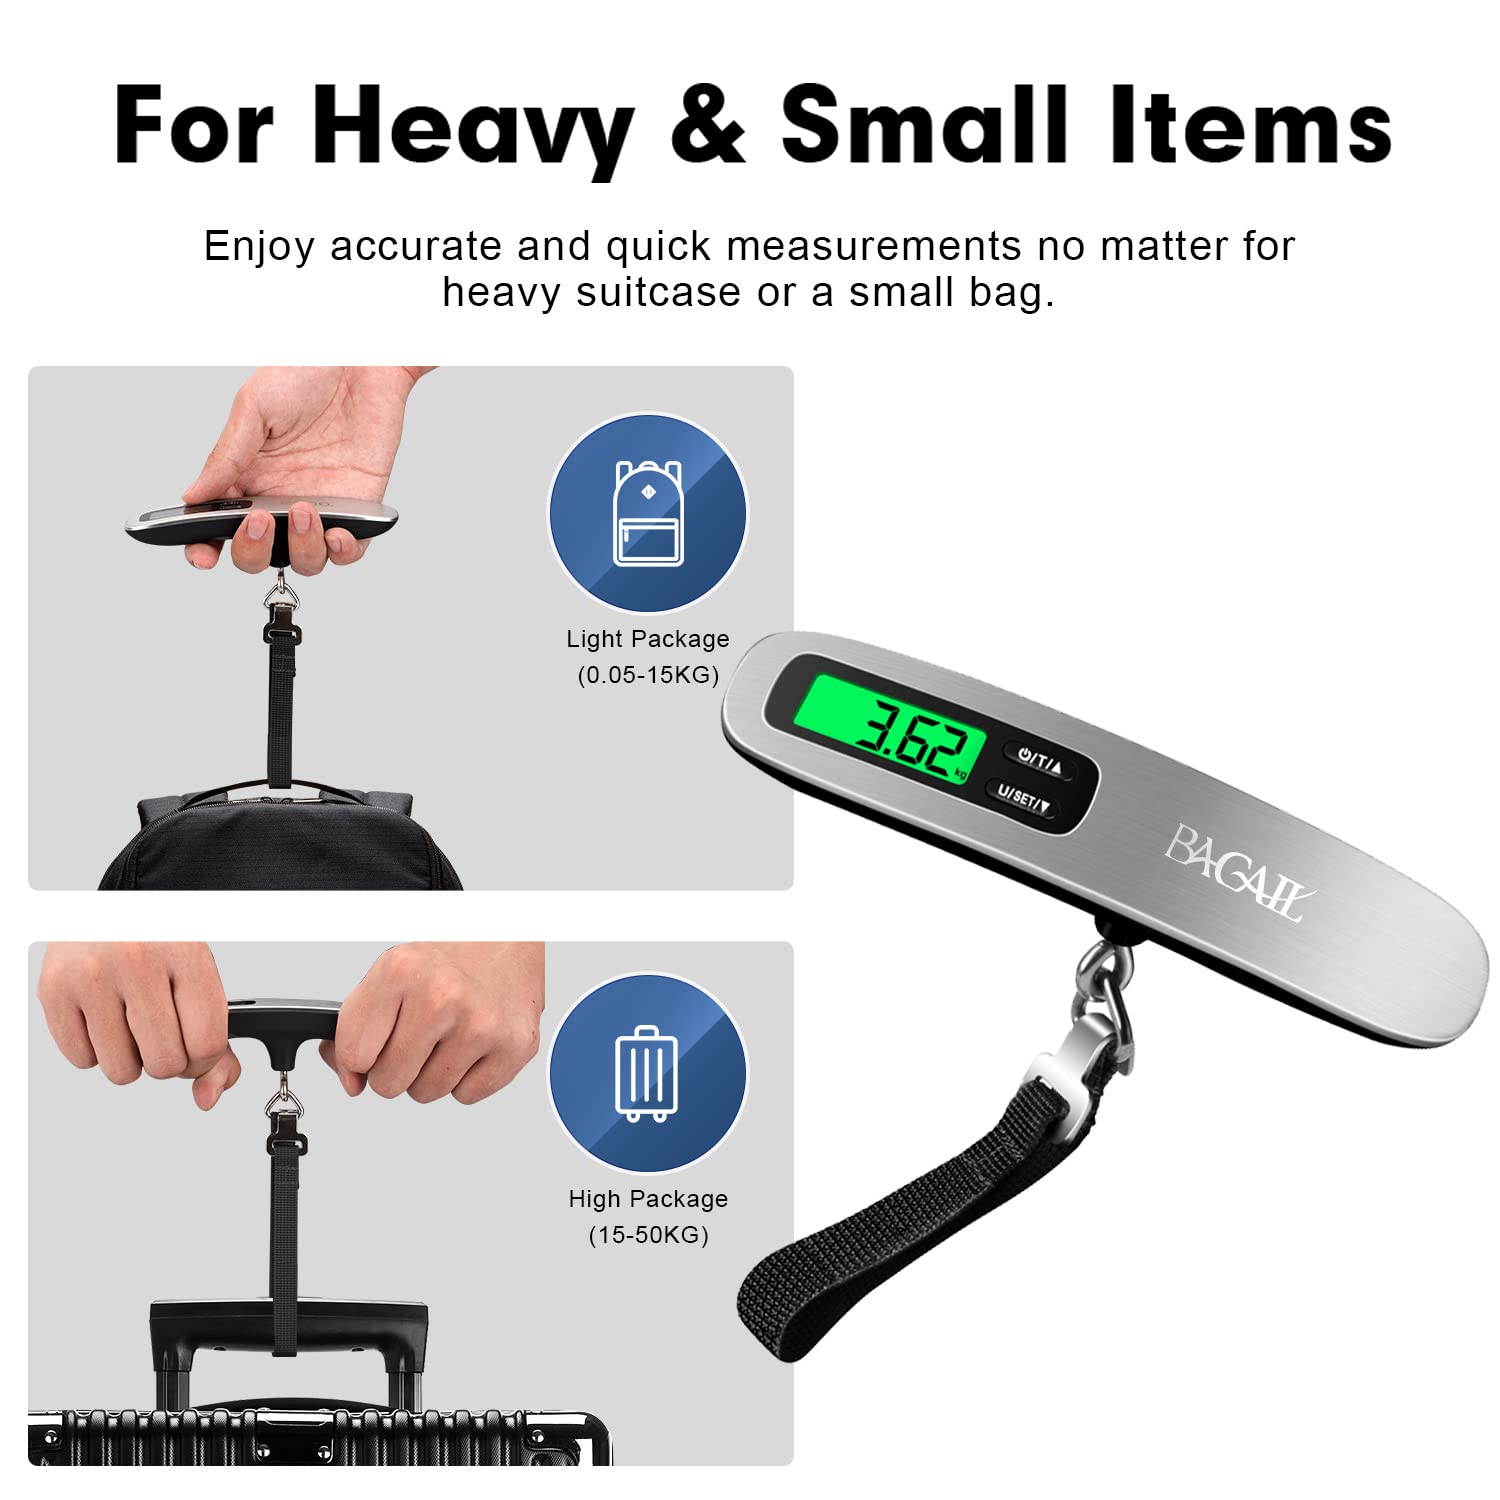 BAGAIL Luggage Scale, Digital Hanging Scale for Travel, Weight Scale with Backlit LCD Display, Portable Suitcase Weighing Scale with Hook, Strong